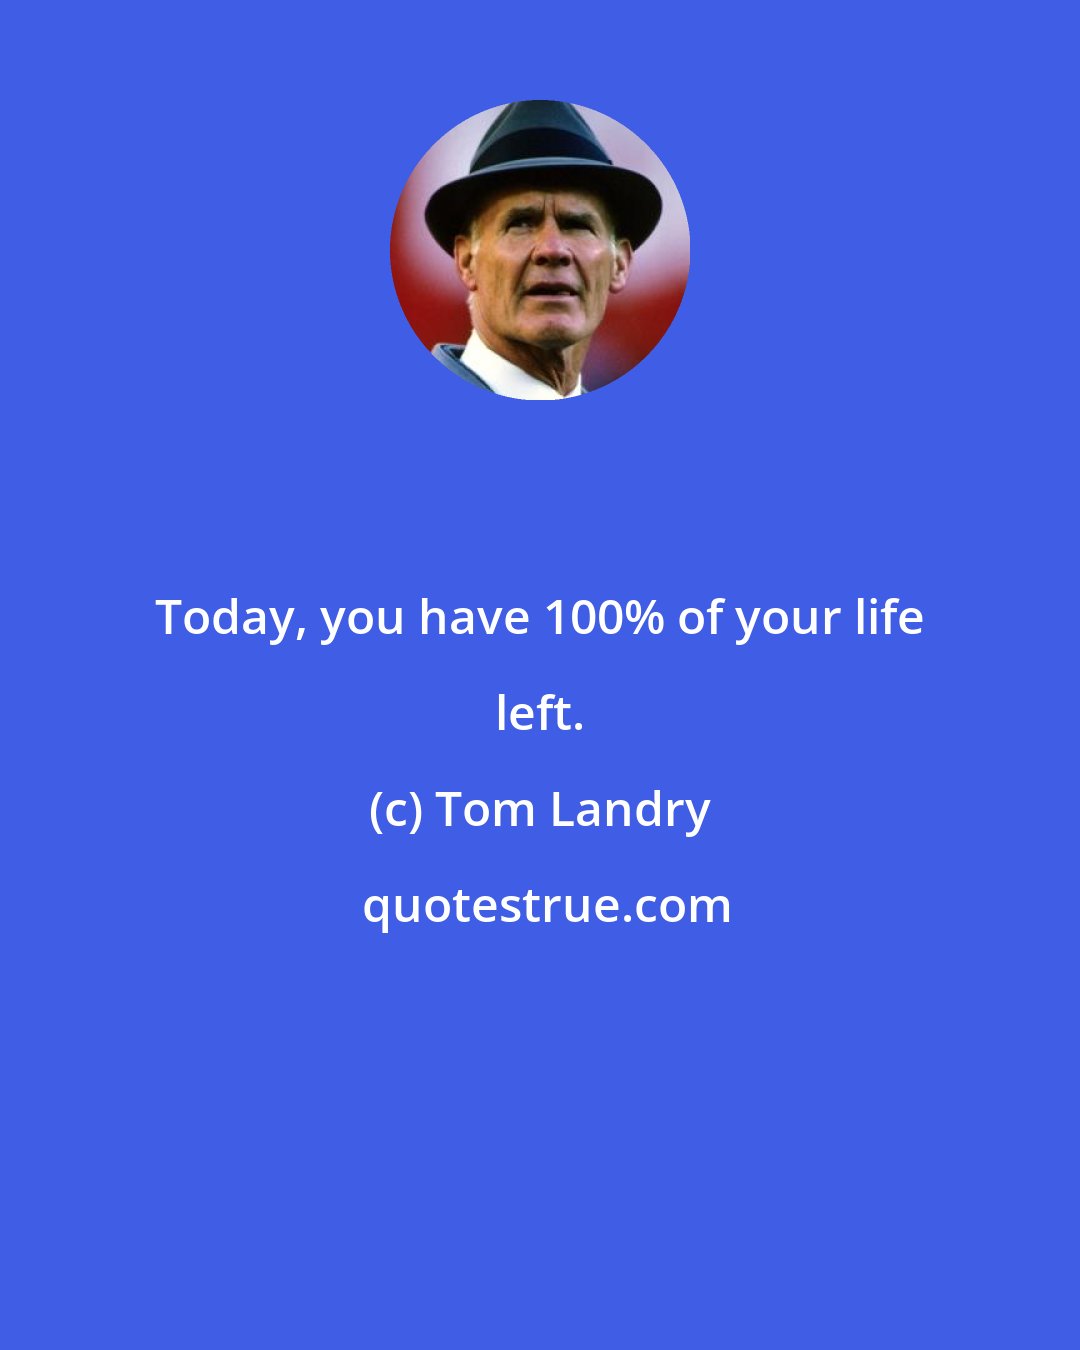 Tom Landry: Today, you have 100% of your life left.